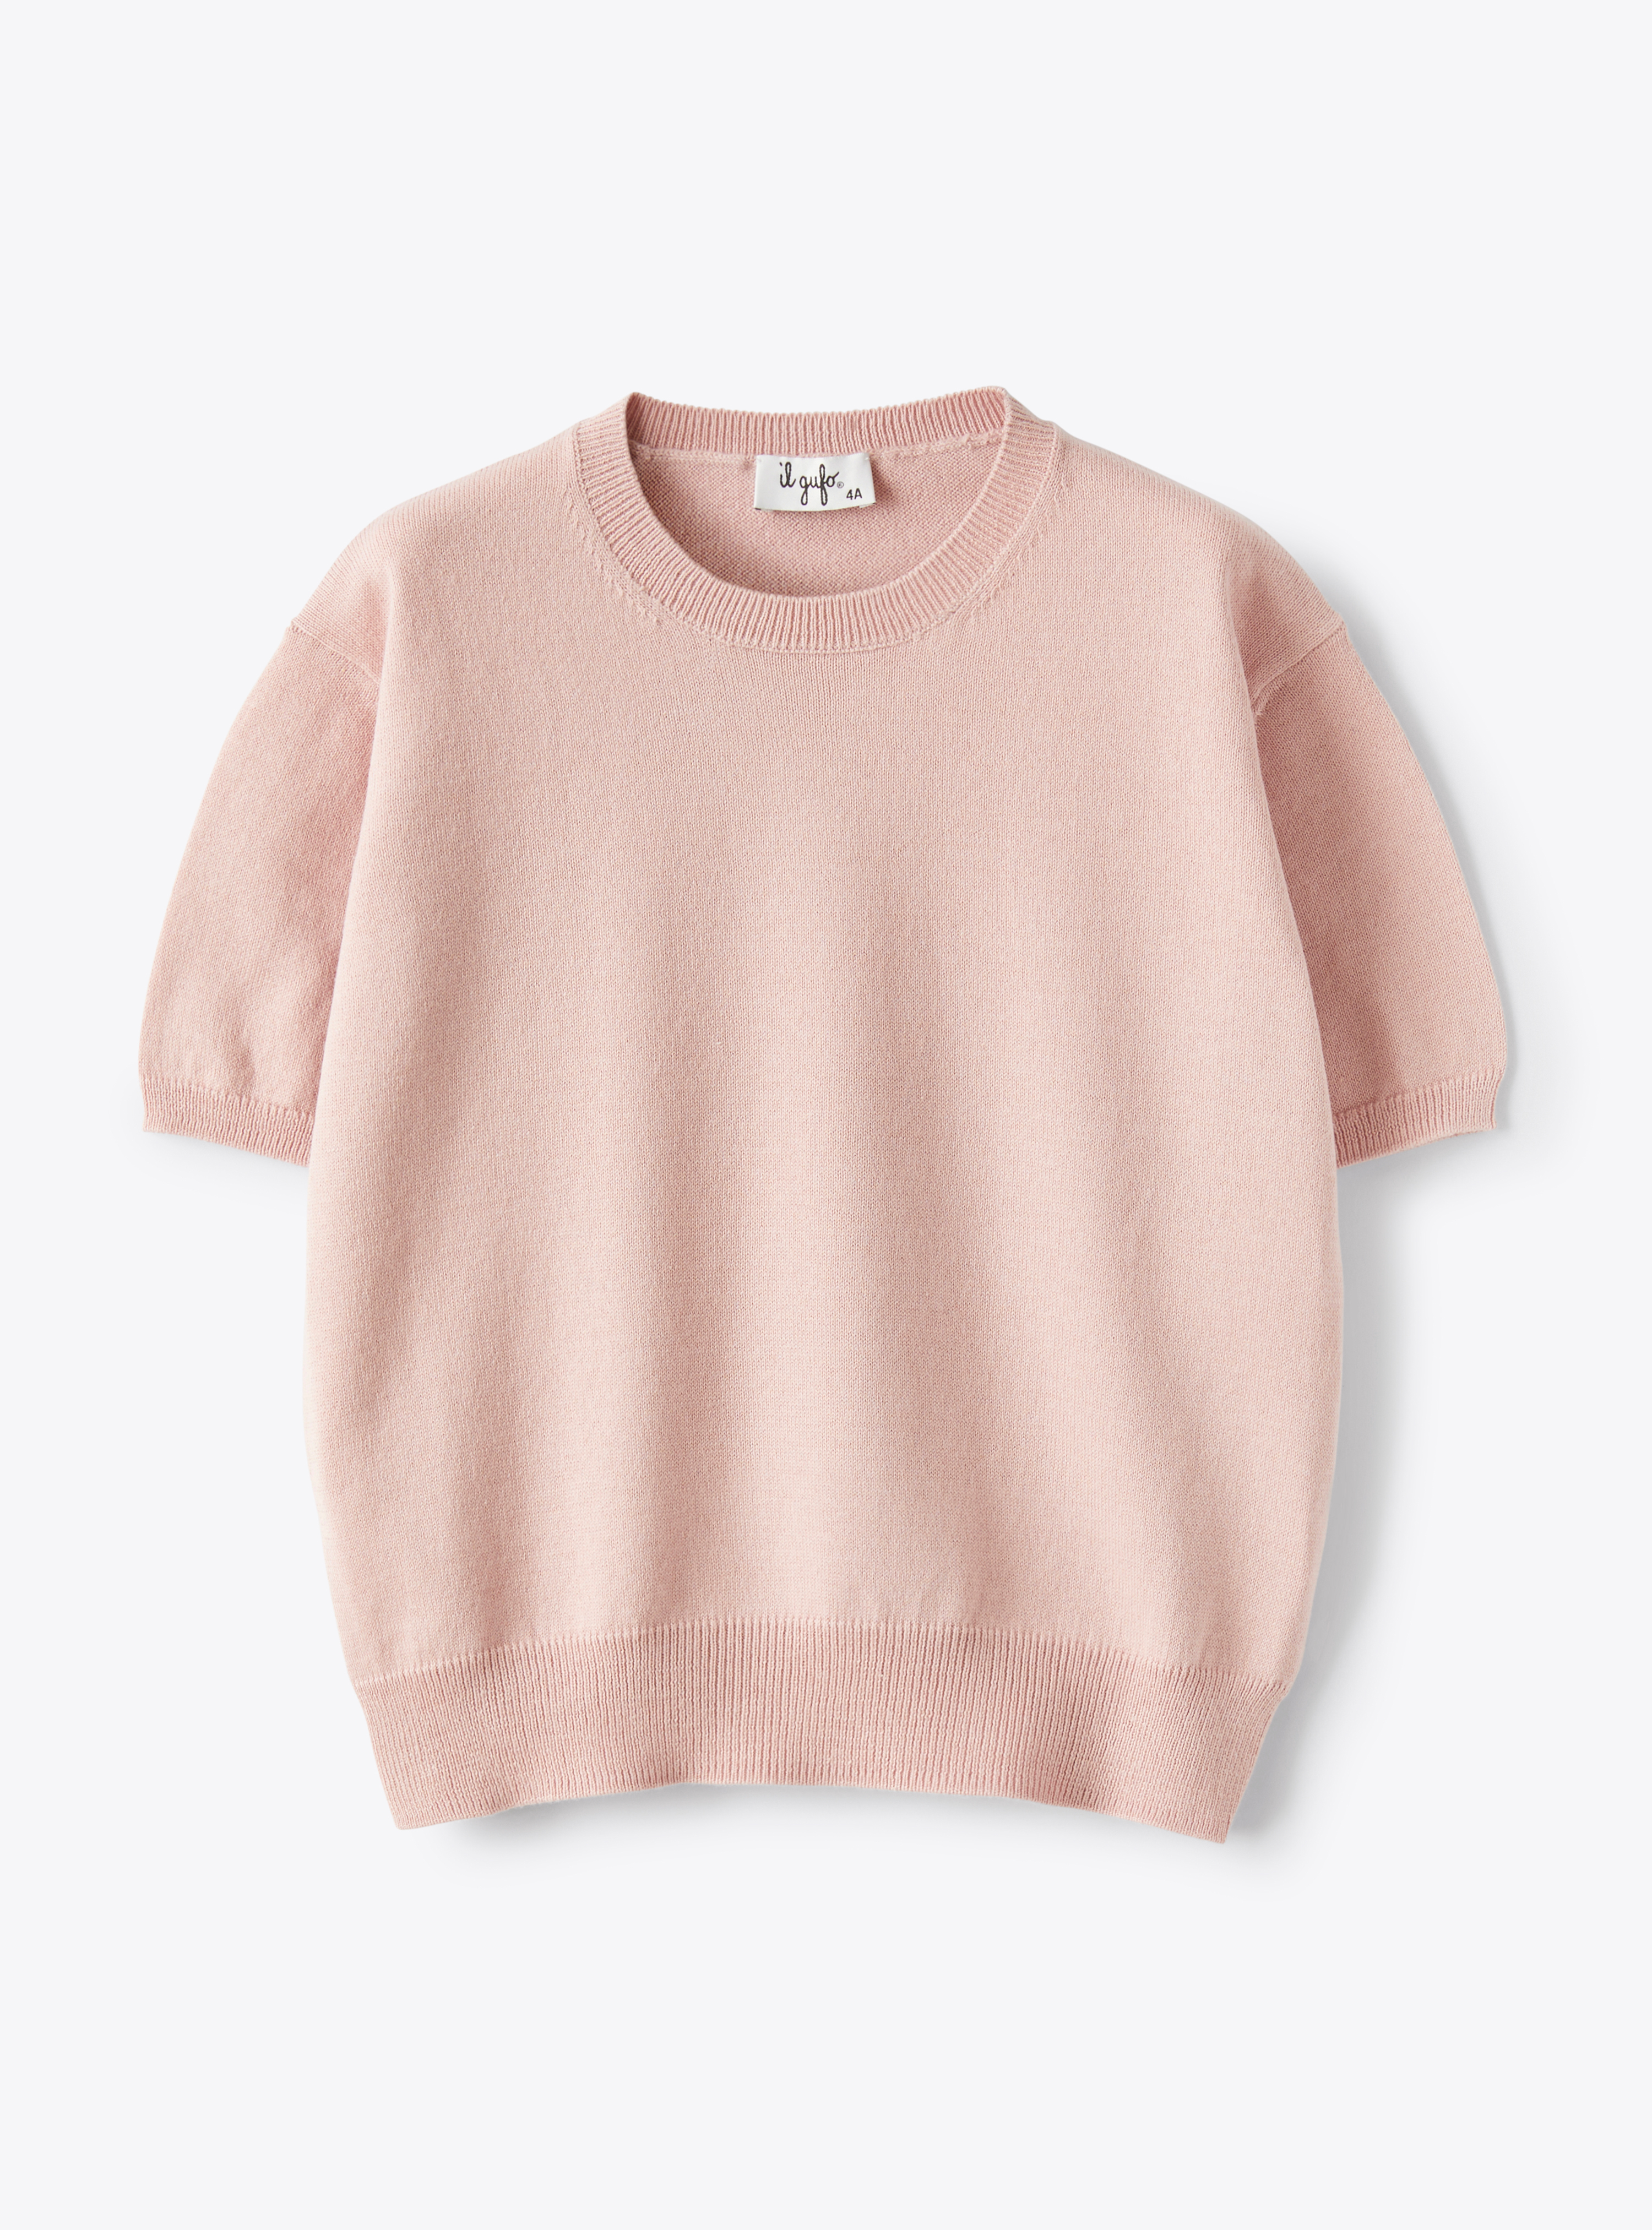 Short-sleeve unisex sweater in pepper-pink organic cotton - Sweaters - Il Gufo